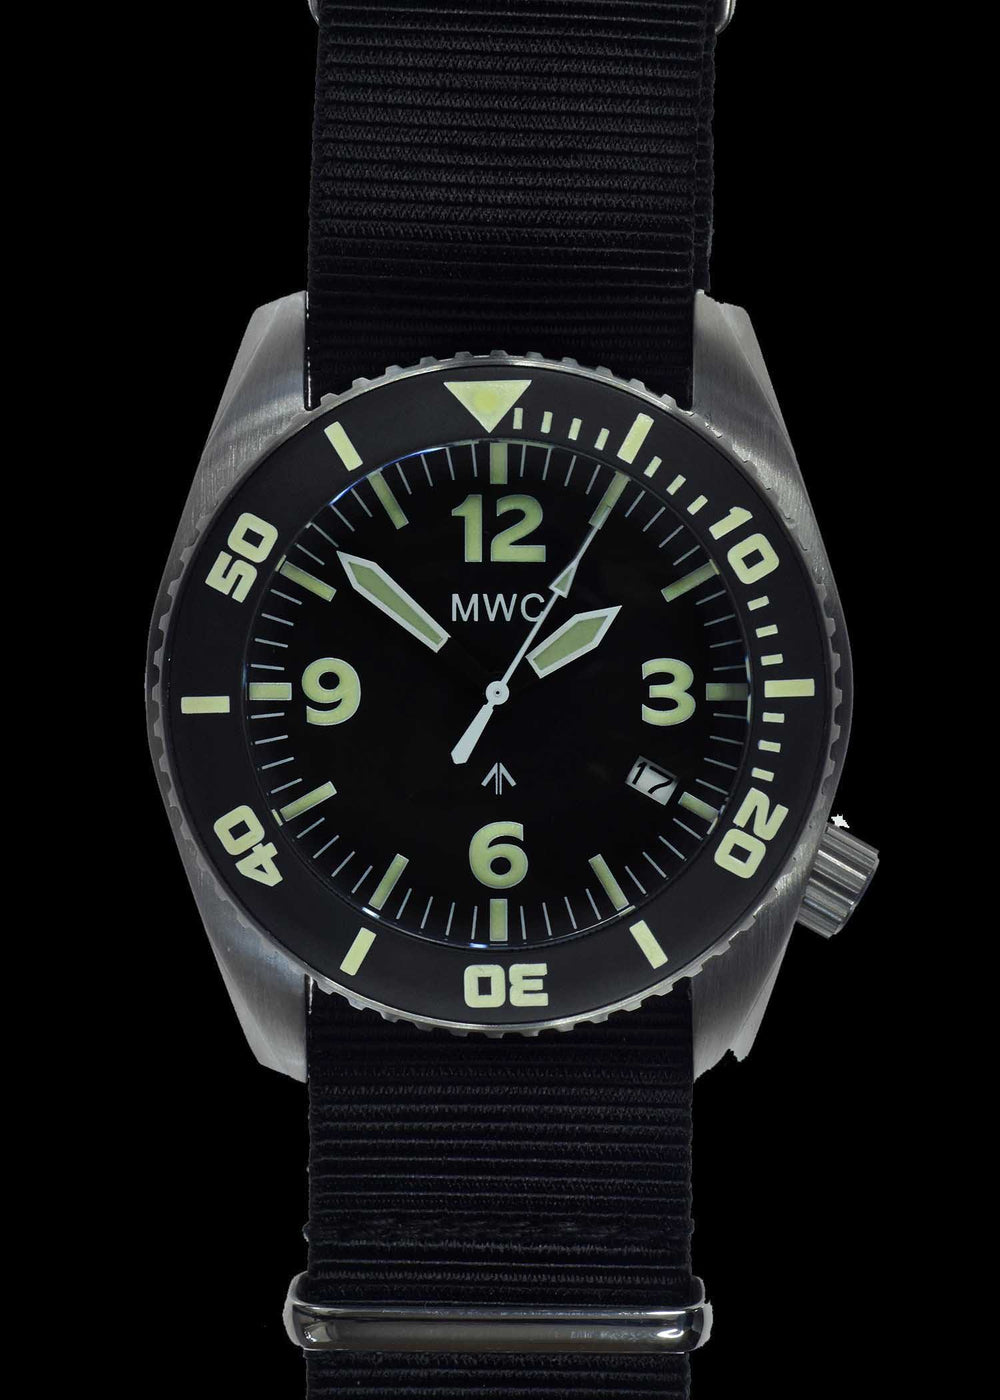 MWC Divers Watch - Depthmaster, 100atm / 3,280ft / 1000m Water Resistant Military Divers Watch, Stainless Steel Case, Helium Valve (Automatic)